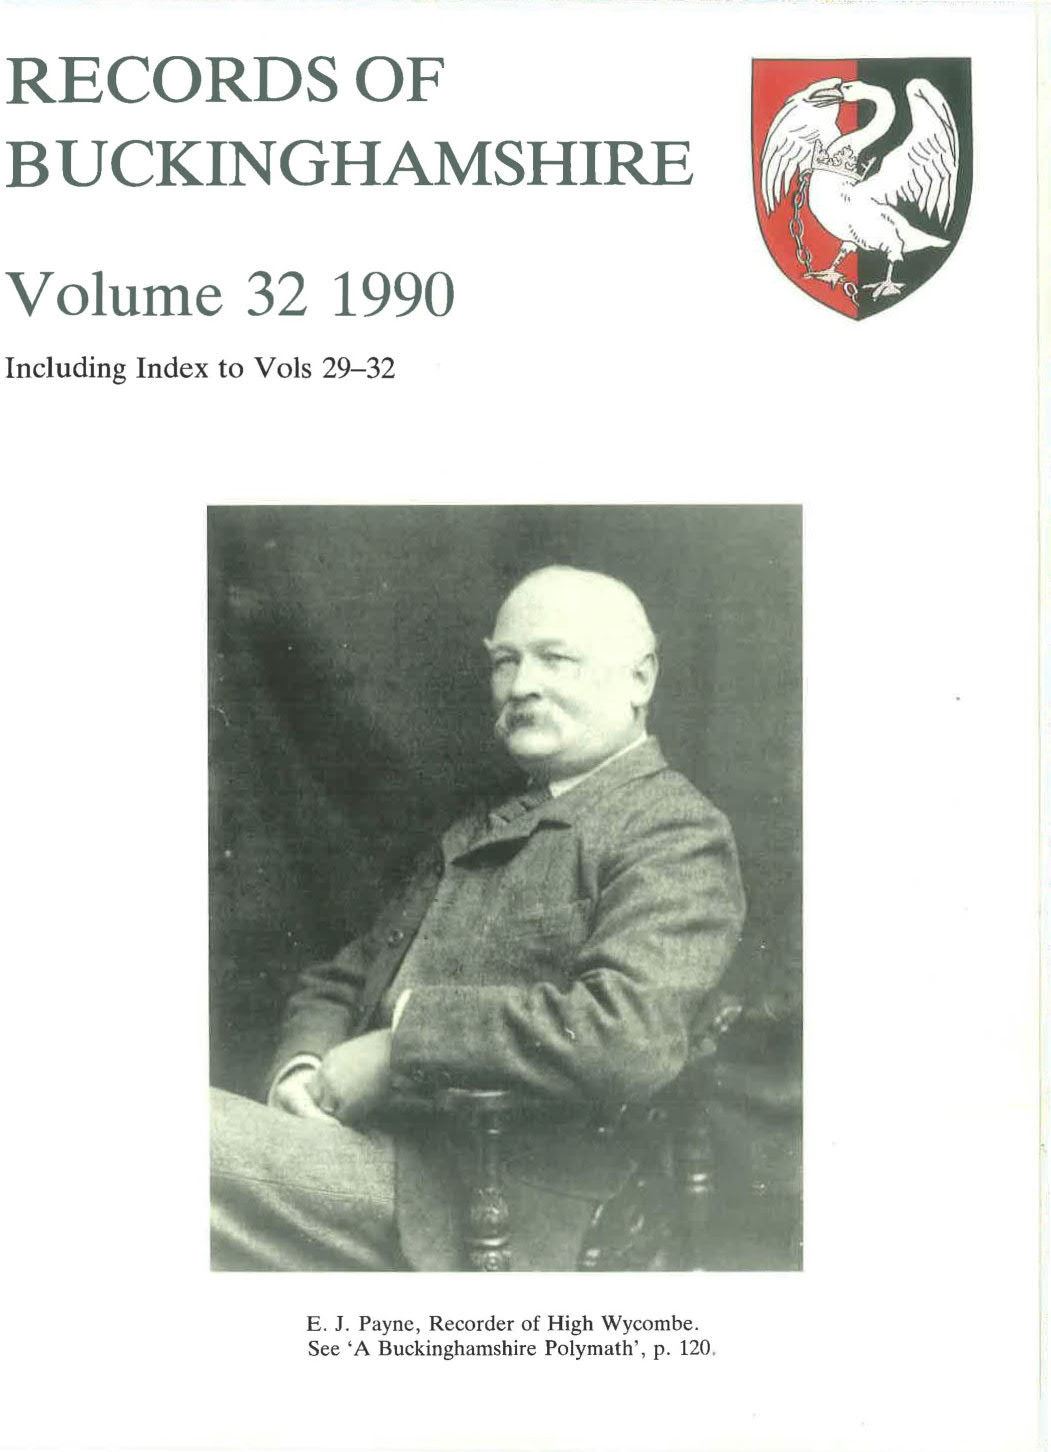 Cover of Records volume 32